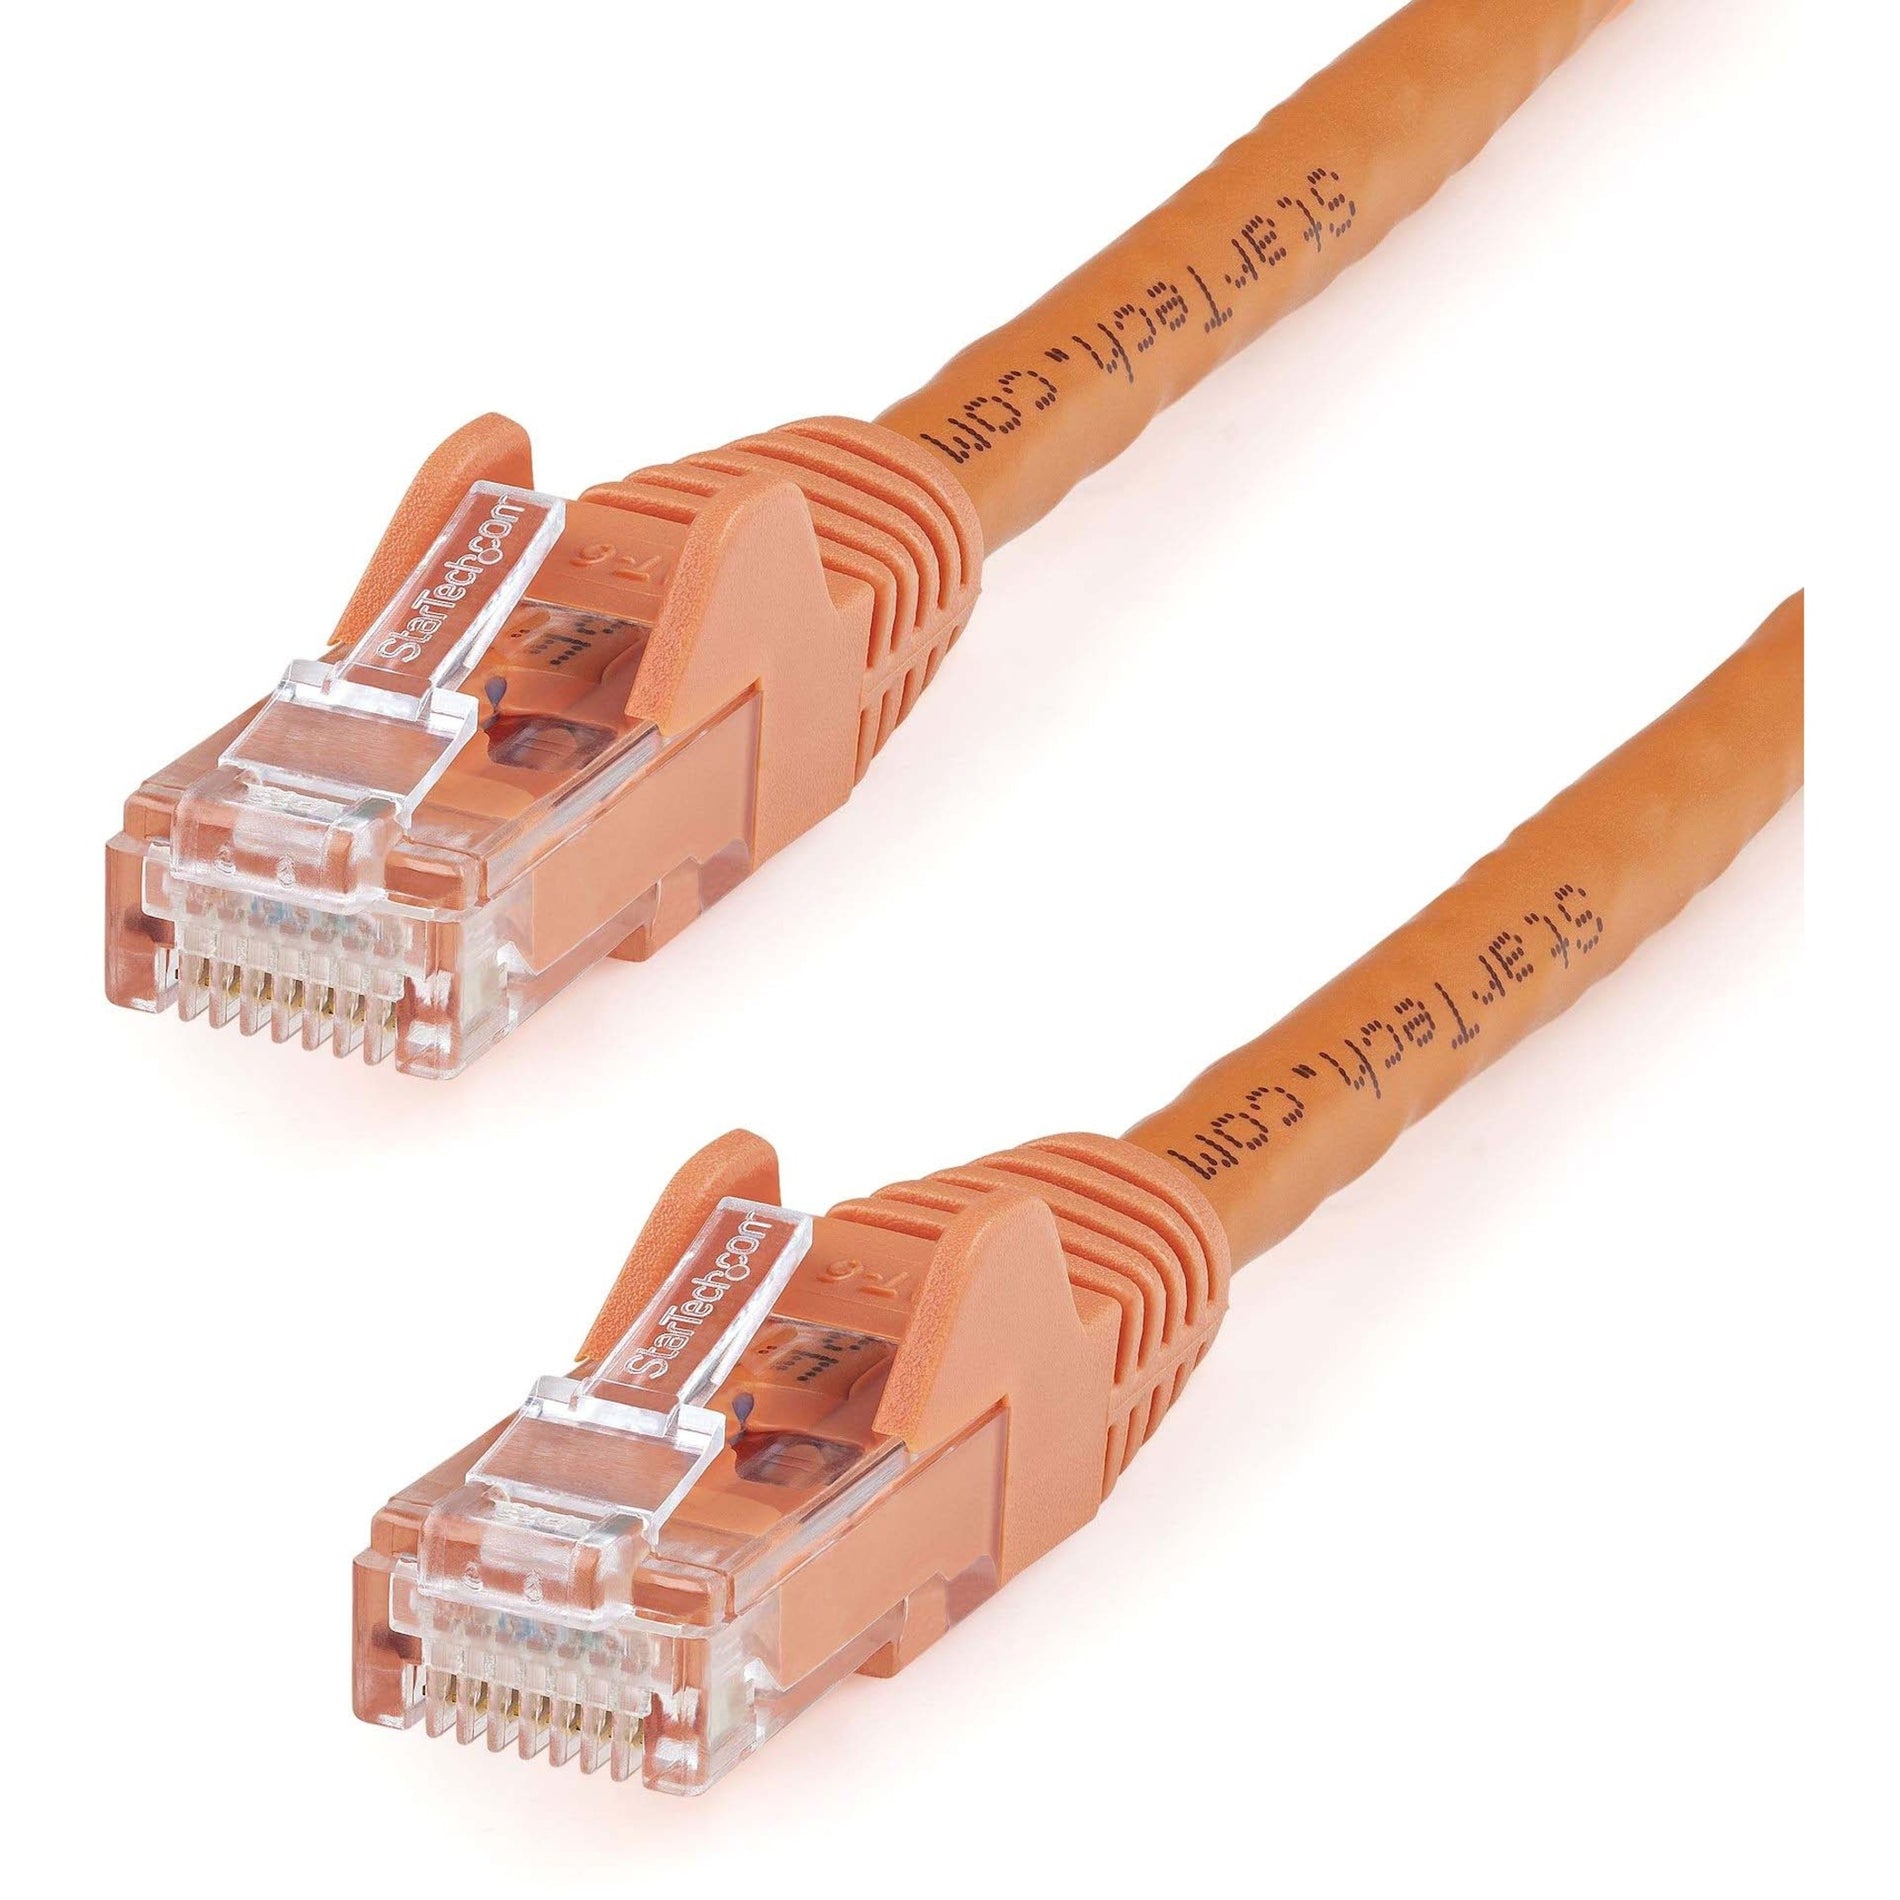 StarTech.com N6PATCH3OR 3 ft Orange Snagless Cat6 UTP Patch Cable Lifetime Warranty 10 Gbit/s Data Transfer Rate  スタートゥク・コム N6PATCH3OR 3フィート オレンジ スナッグレス Cat6 UTP パッチケーブル ライフタイム保証 10ギガビット/秒 データ転送レート